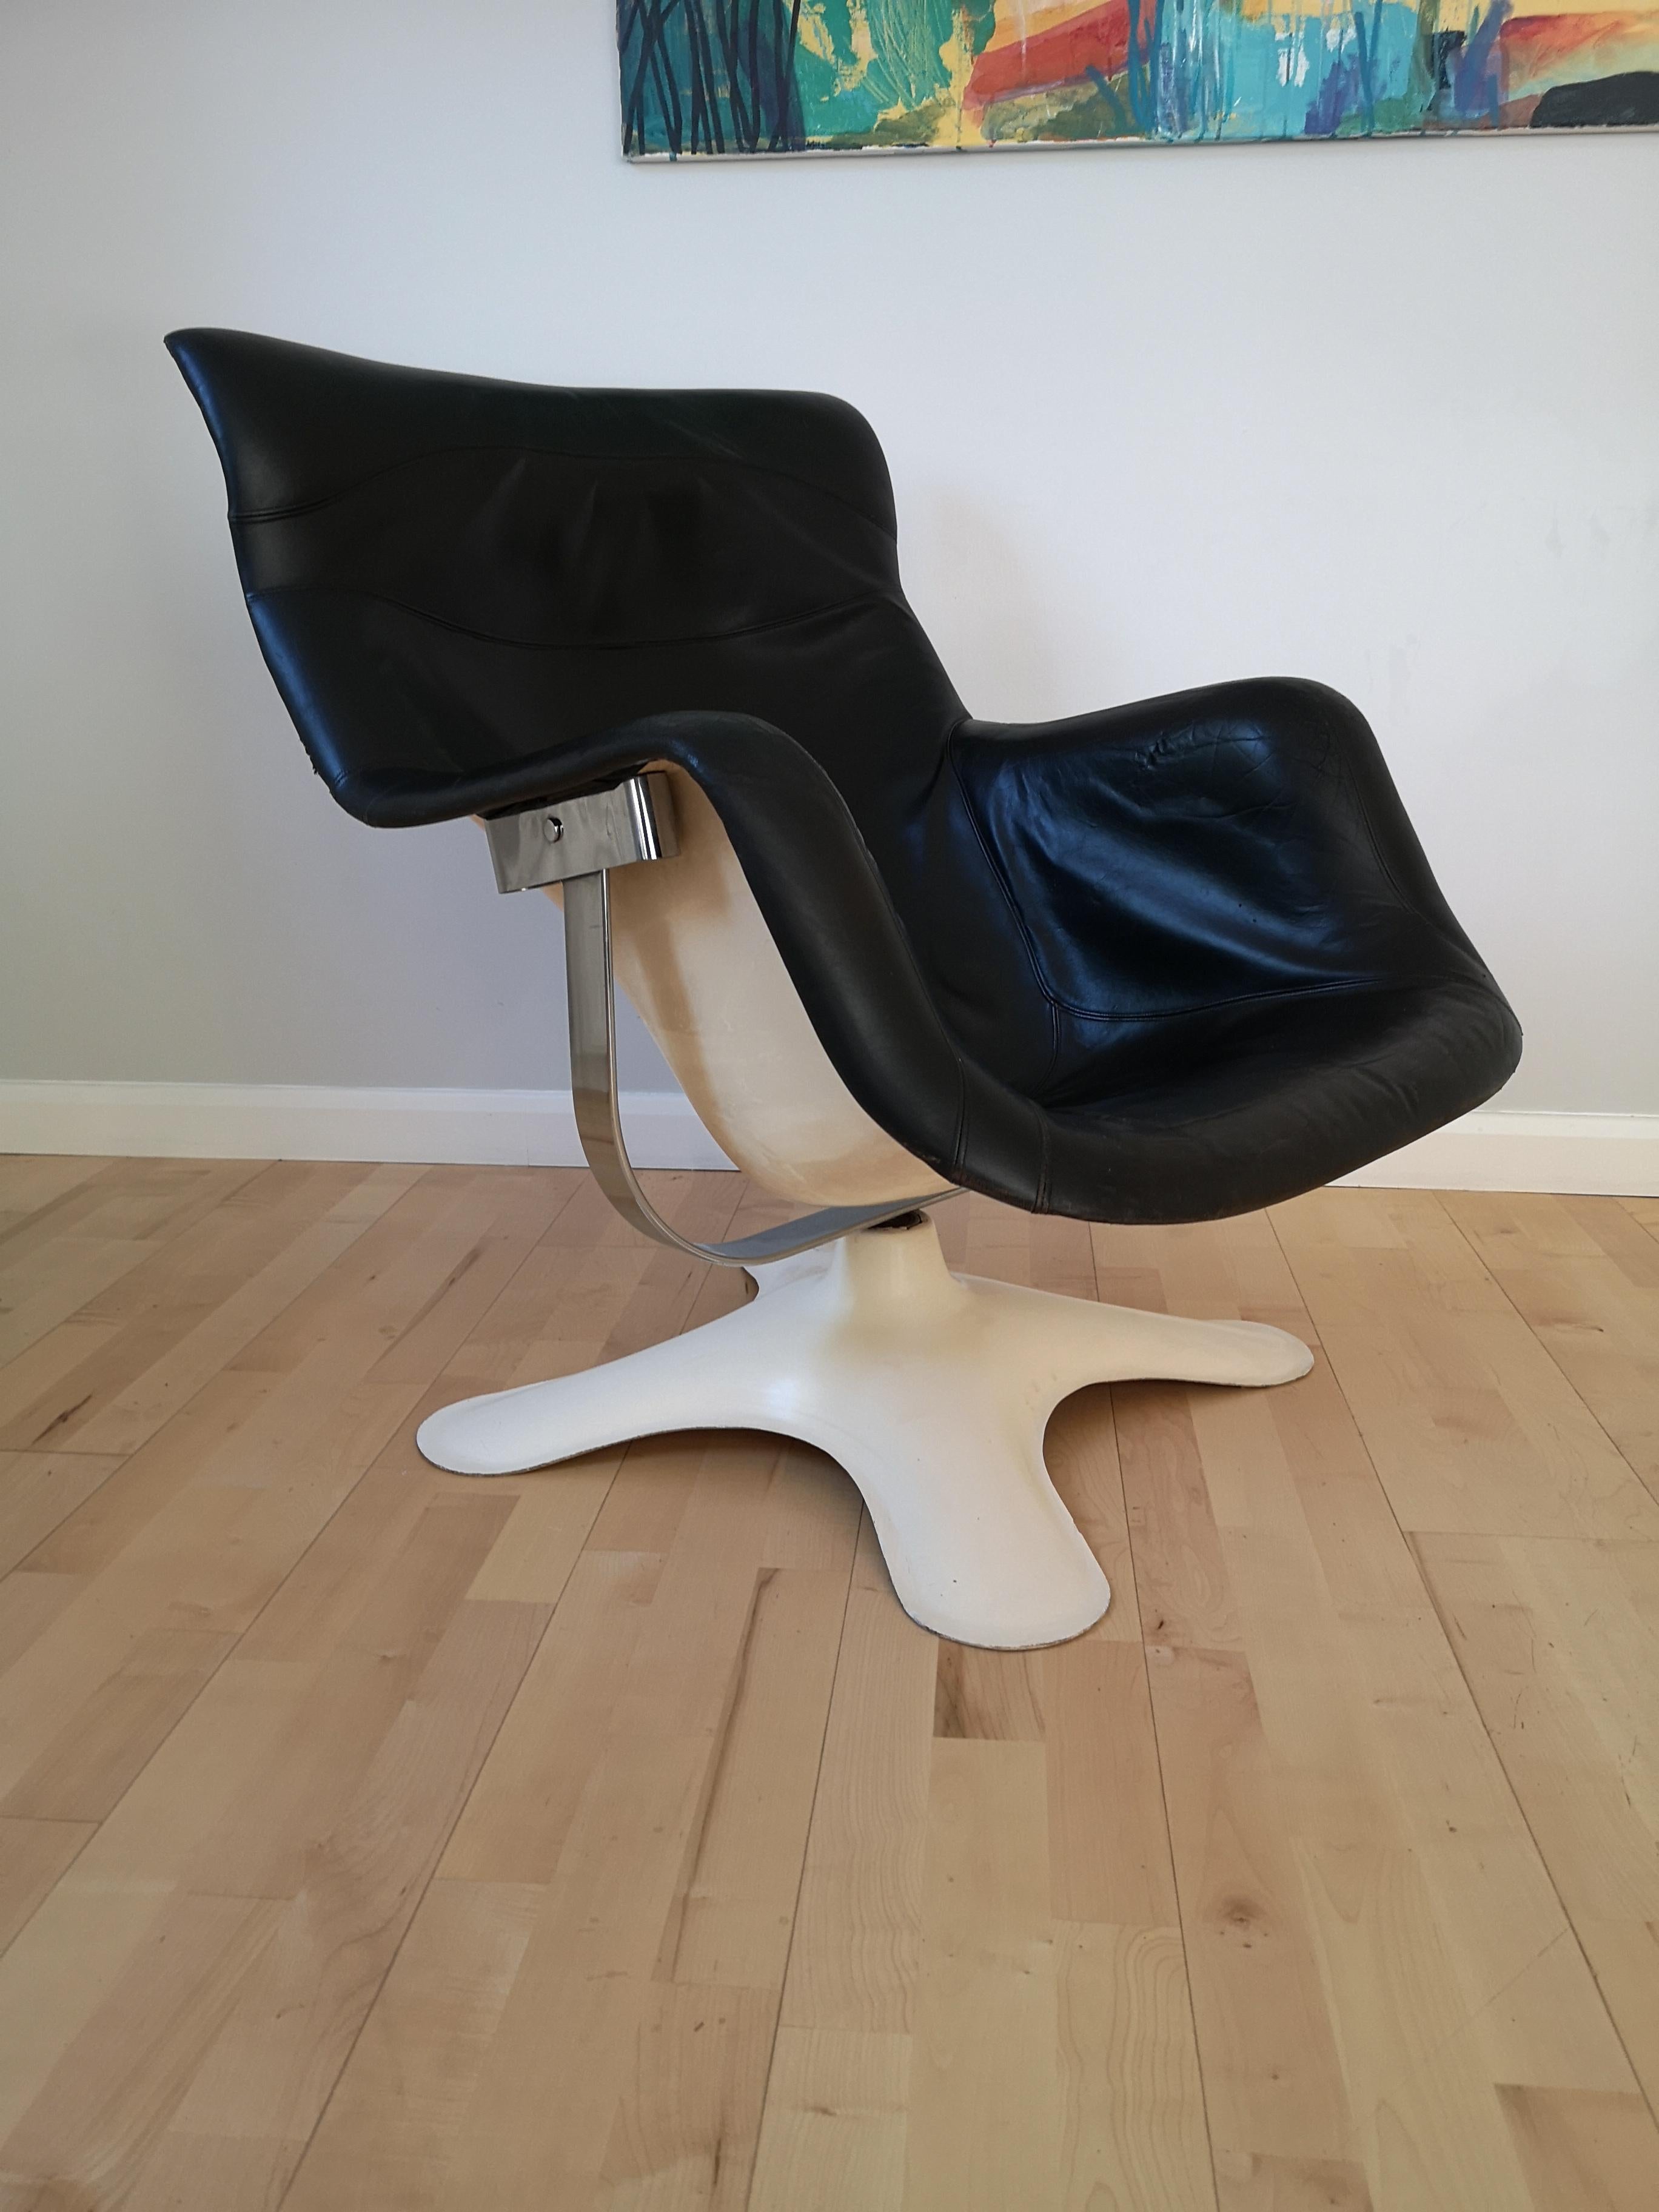 A stunning Karuselli leather and fiberglass swivel armchair by Yrjö Kukkapuro for Haimi Oy, launched in 1964. The chair has a fiberglass shell and base. The seat based is connected to the base by chromed steel spring and rubber dampers and the chair